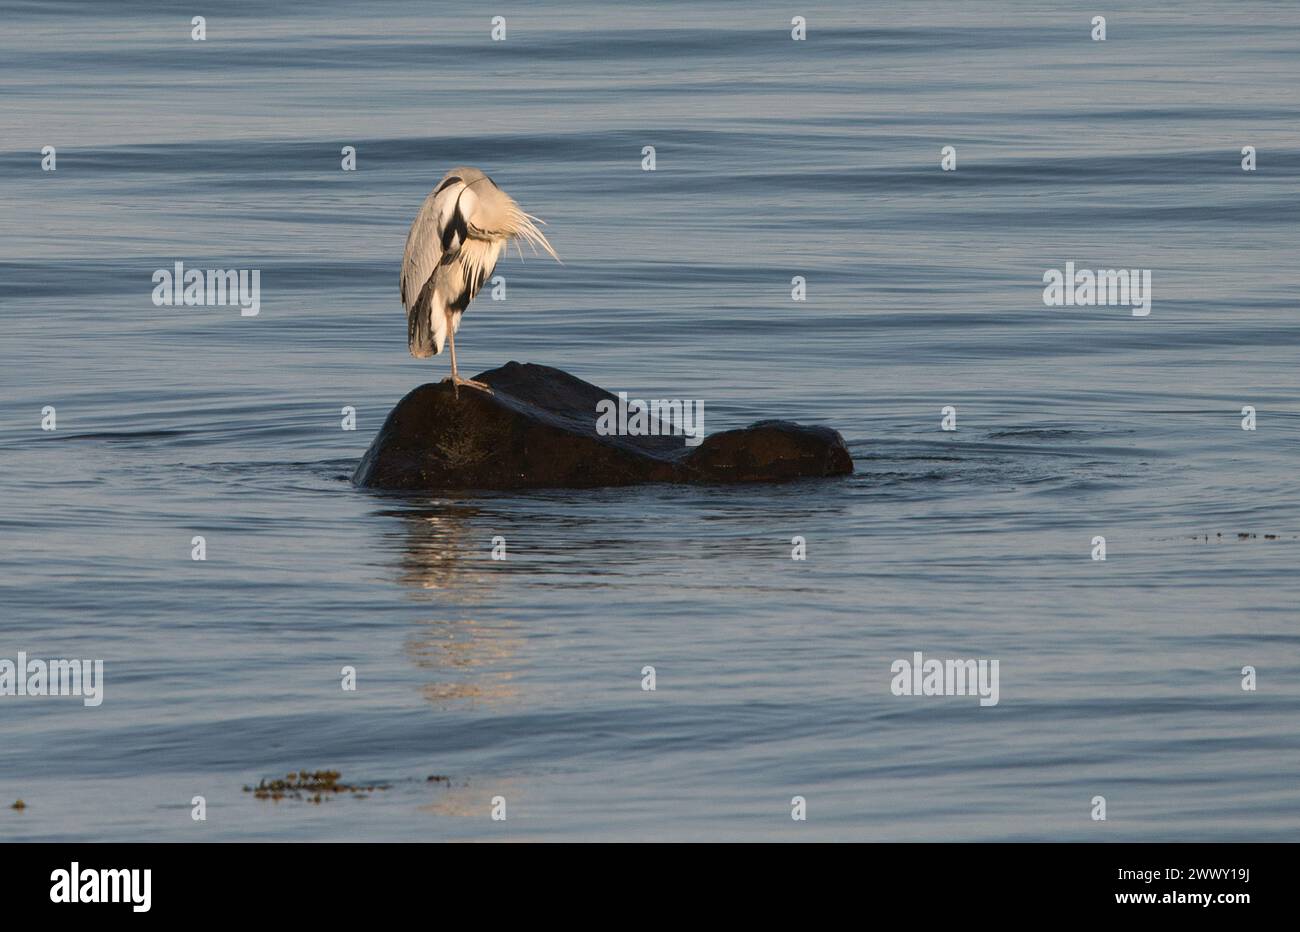 Grey Heron standing on one leg with head tucked into body while preening itself on a rock surrounded by sea Stock Photo